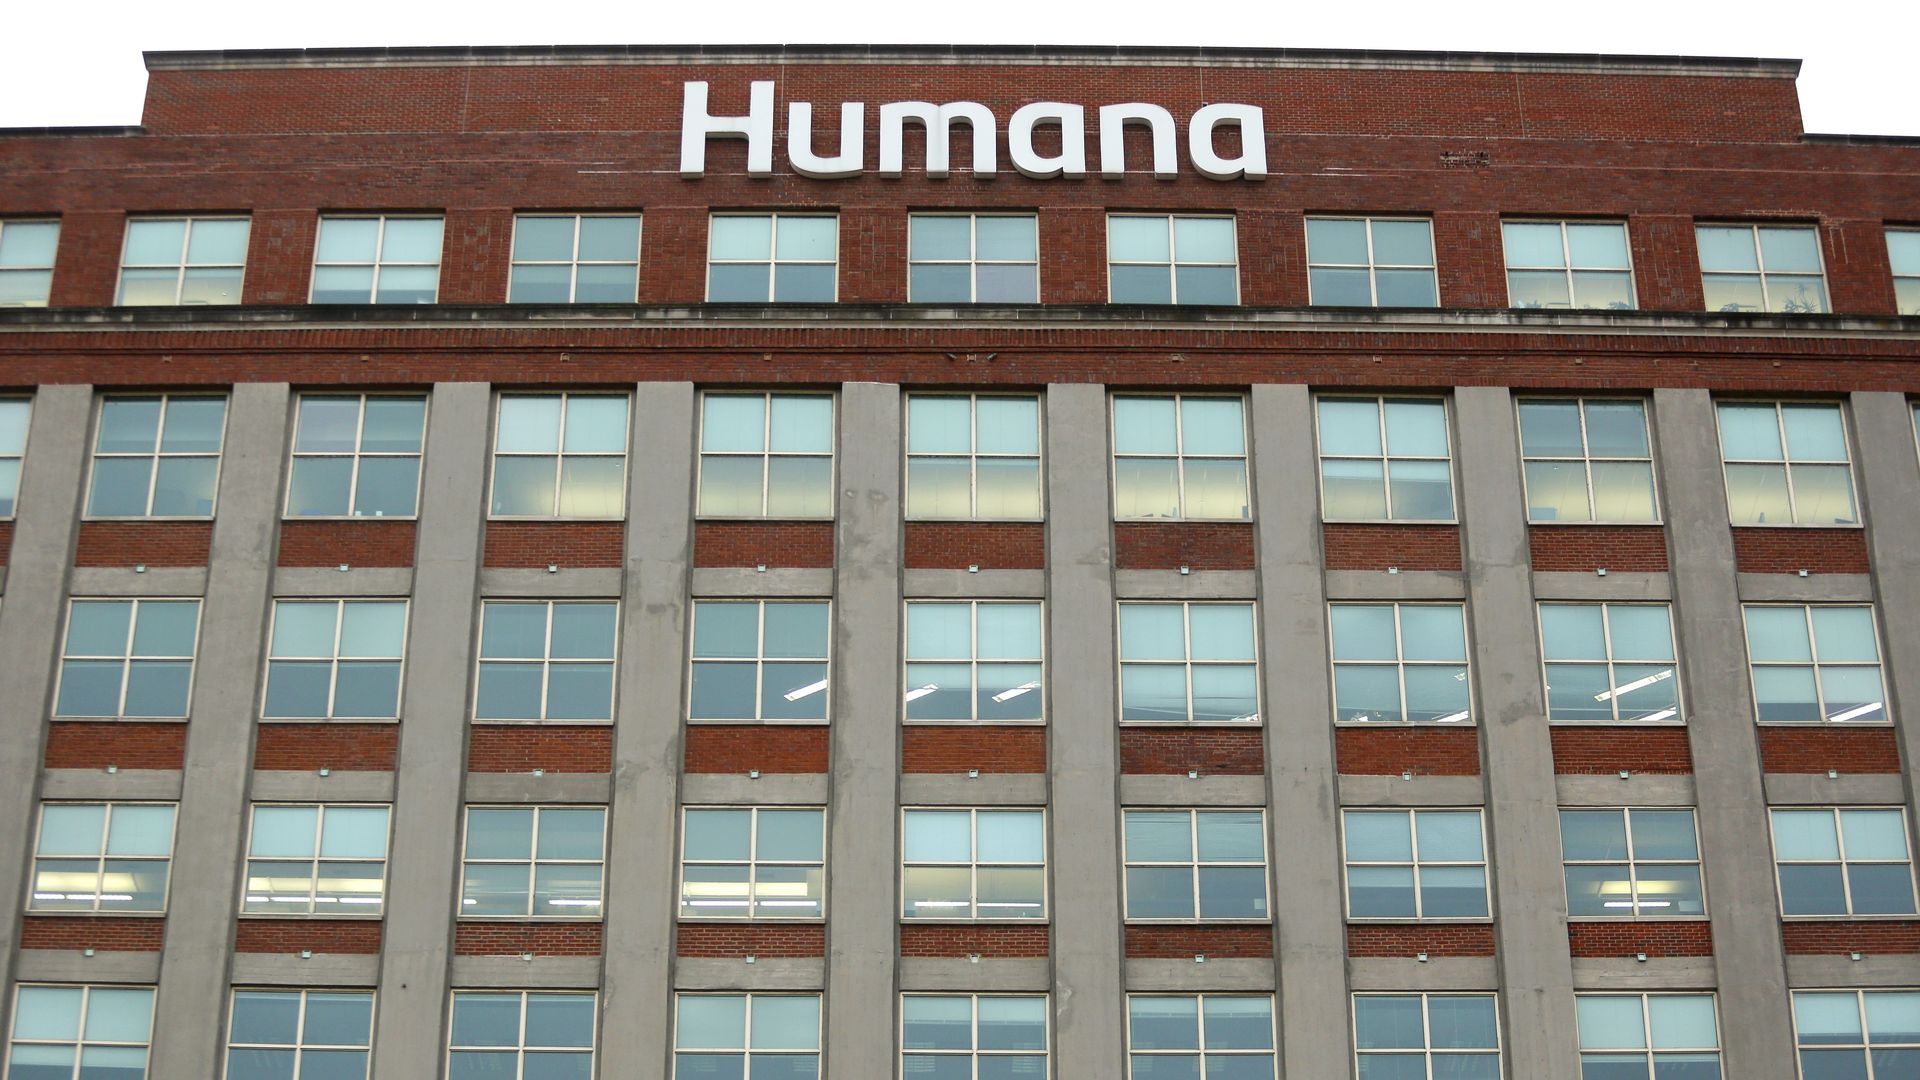 Humana's office building